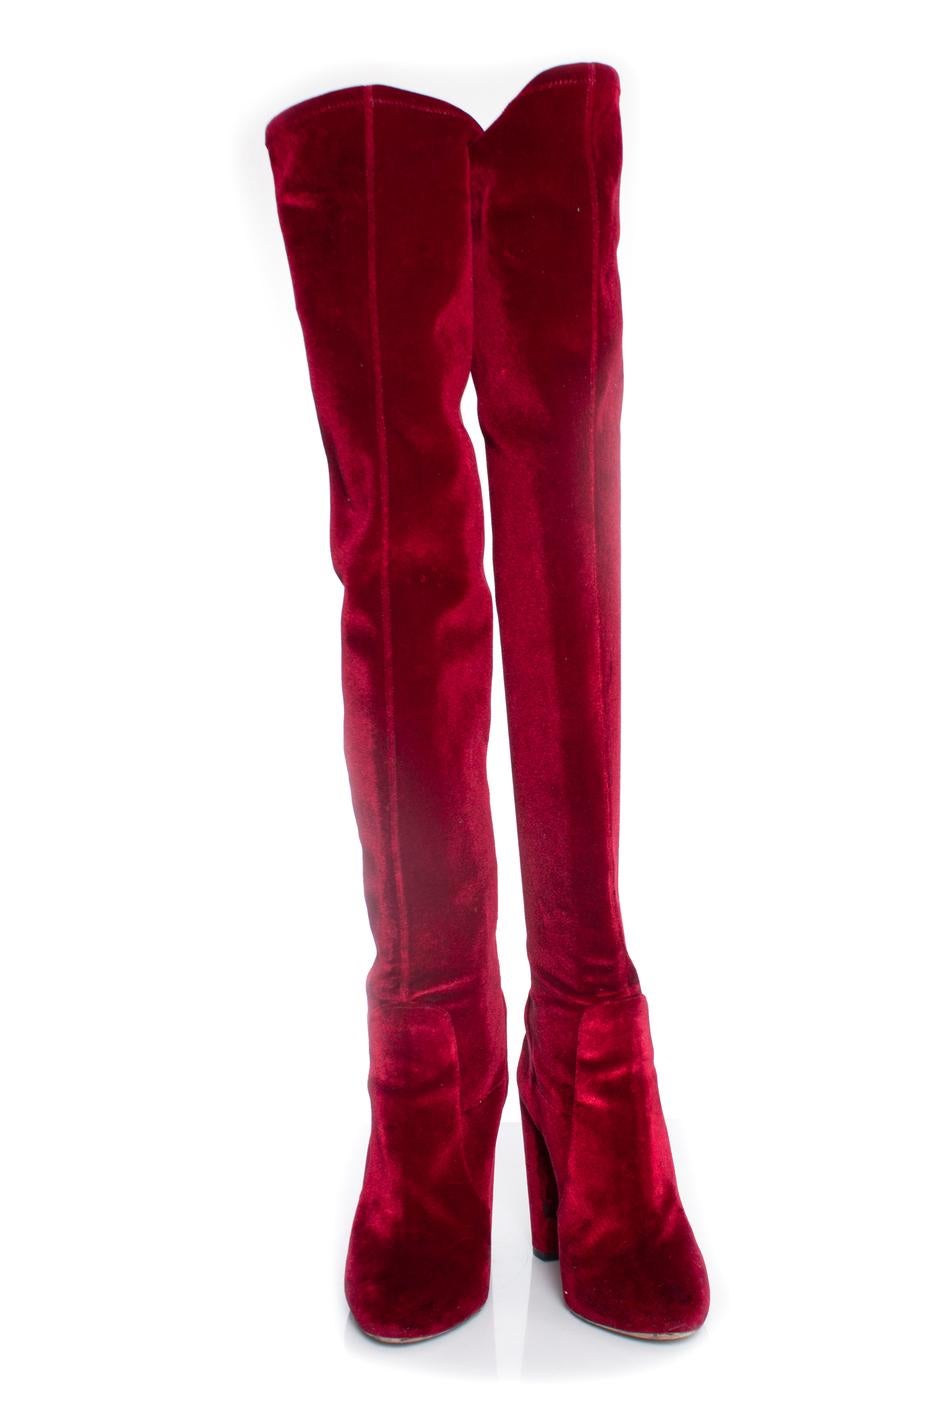 Aquazurra, Red Thigh high velvet over the knee boots. This piece has a few small stains on the velvet. Light scuffs on the inside of both heels.

• CONDITION: good condition

• SIZE: 40

• INSOLE MEASUREMENTS: 26.5 cm

• HEEL MEASUREMENTS: 11.5 cm